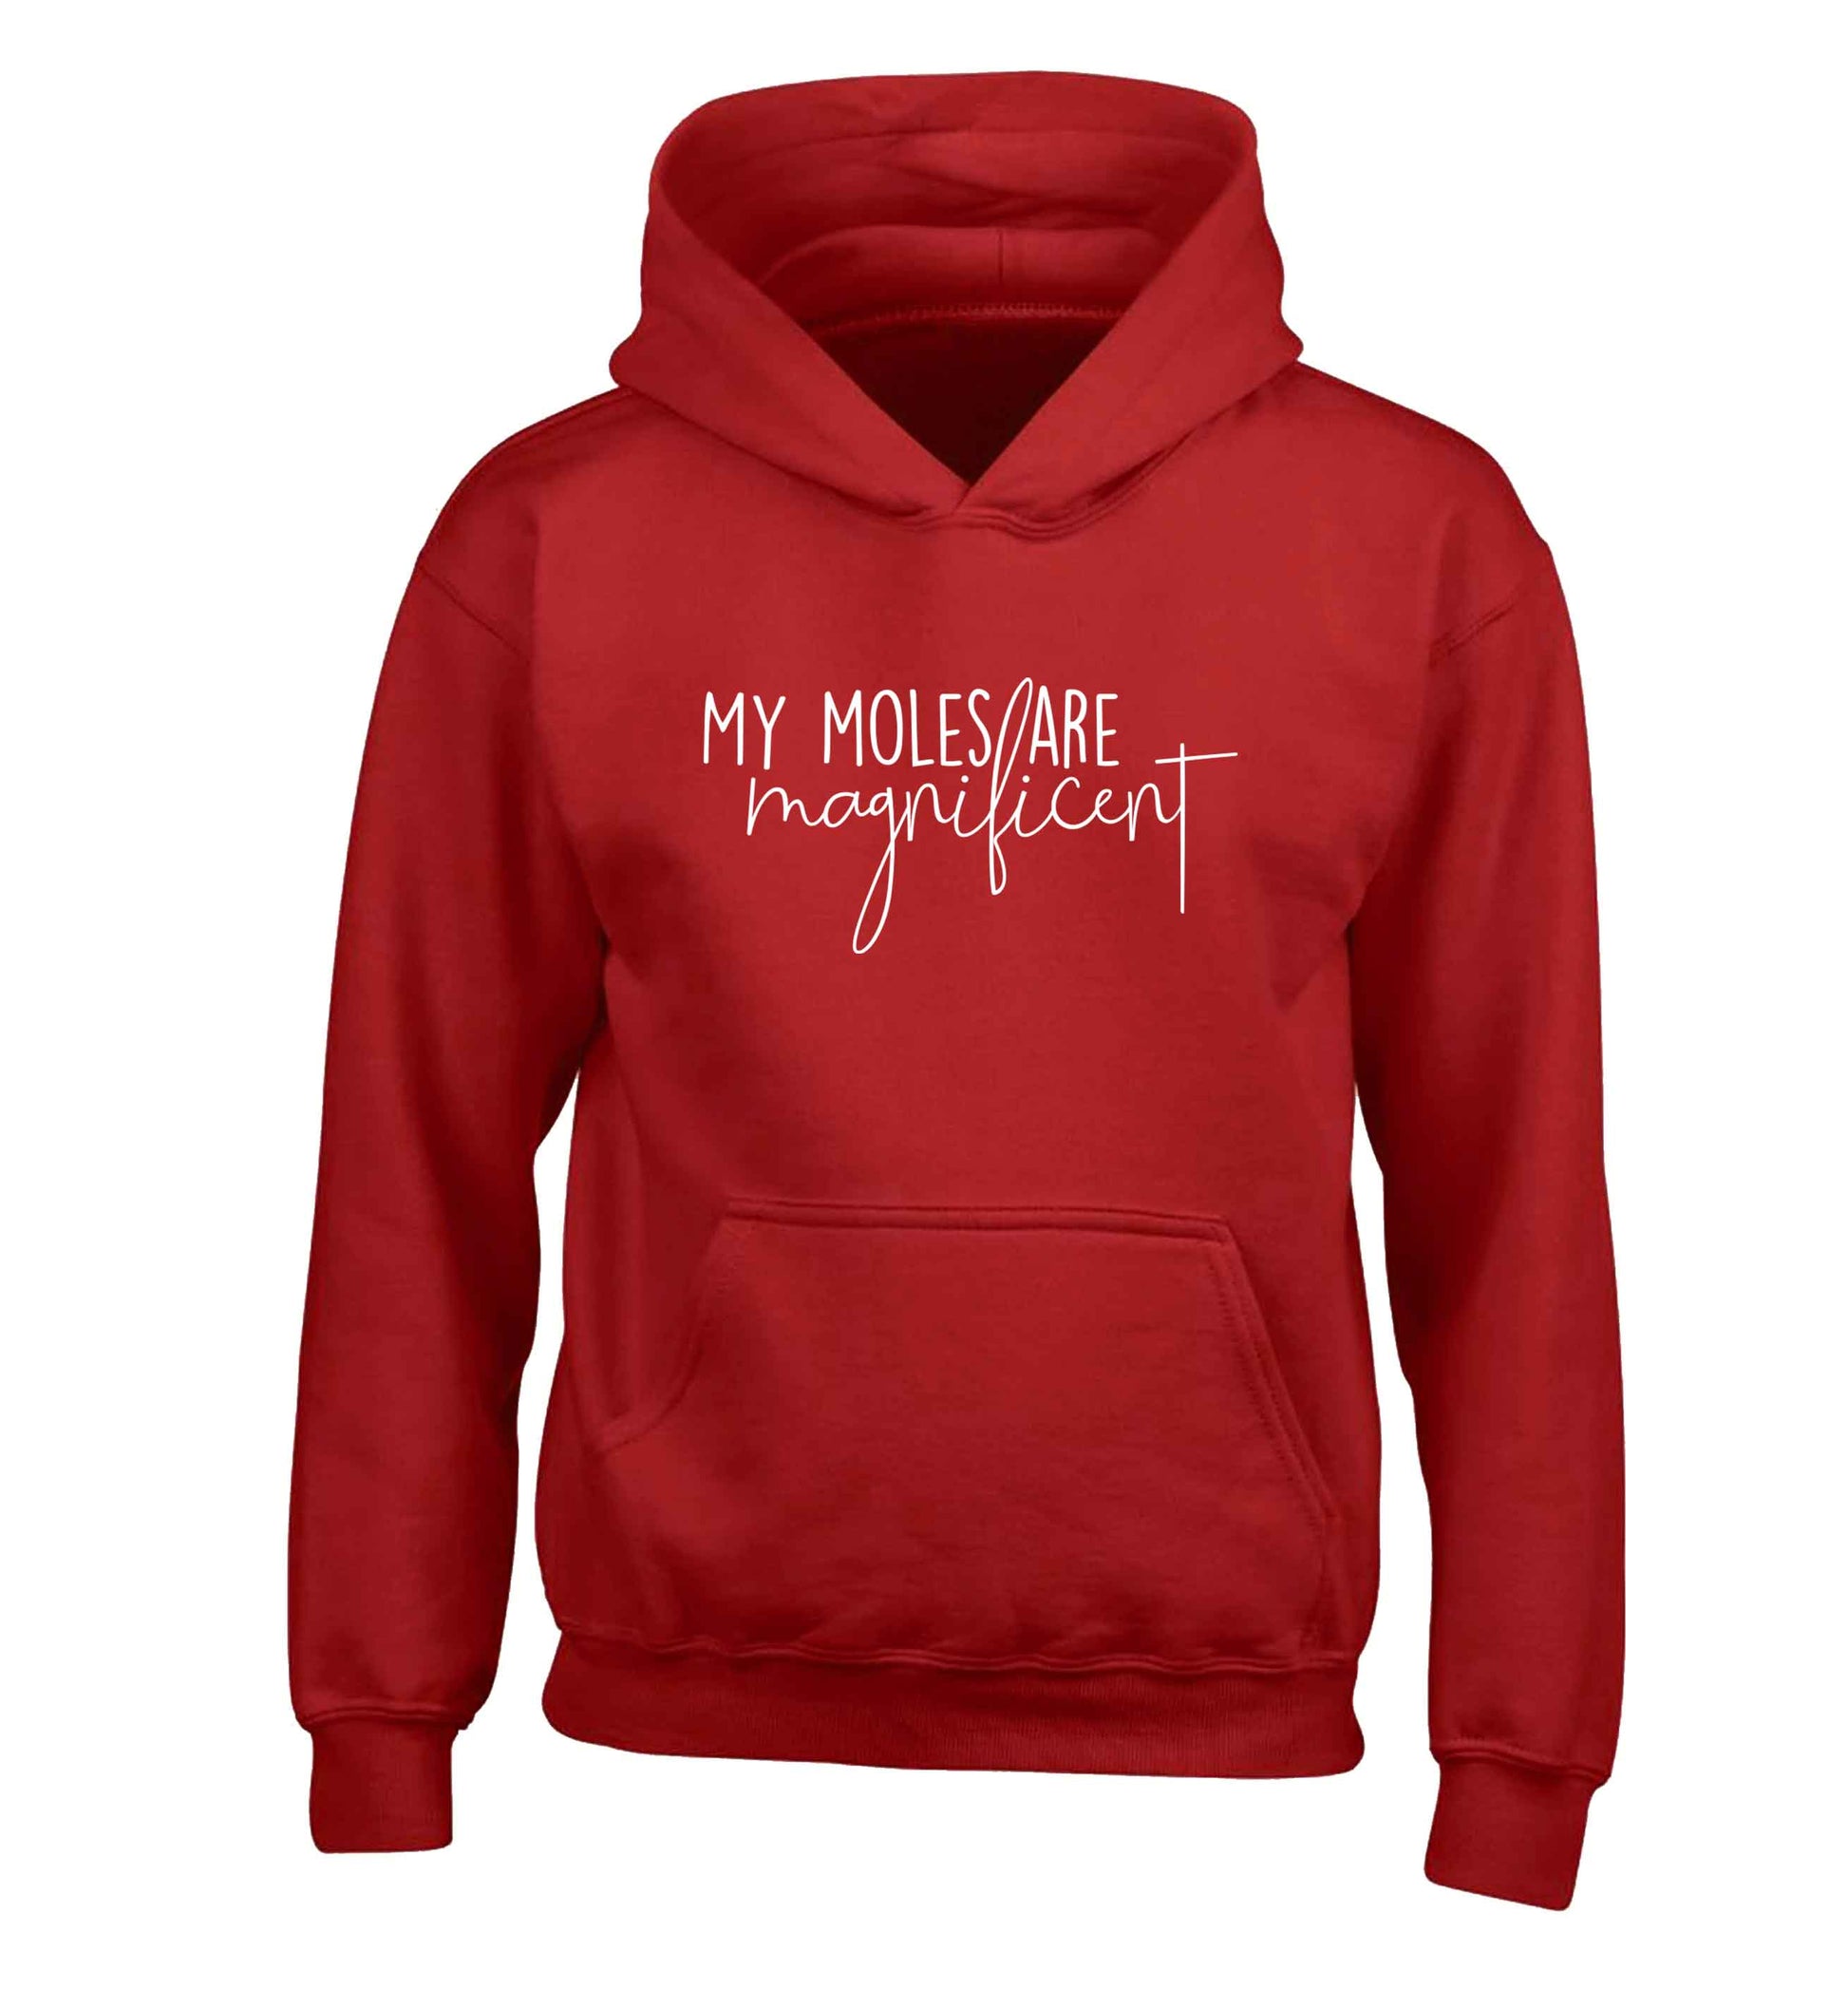 My moles are magnificent children's red hoodie 12-13 Years